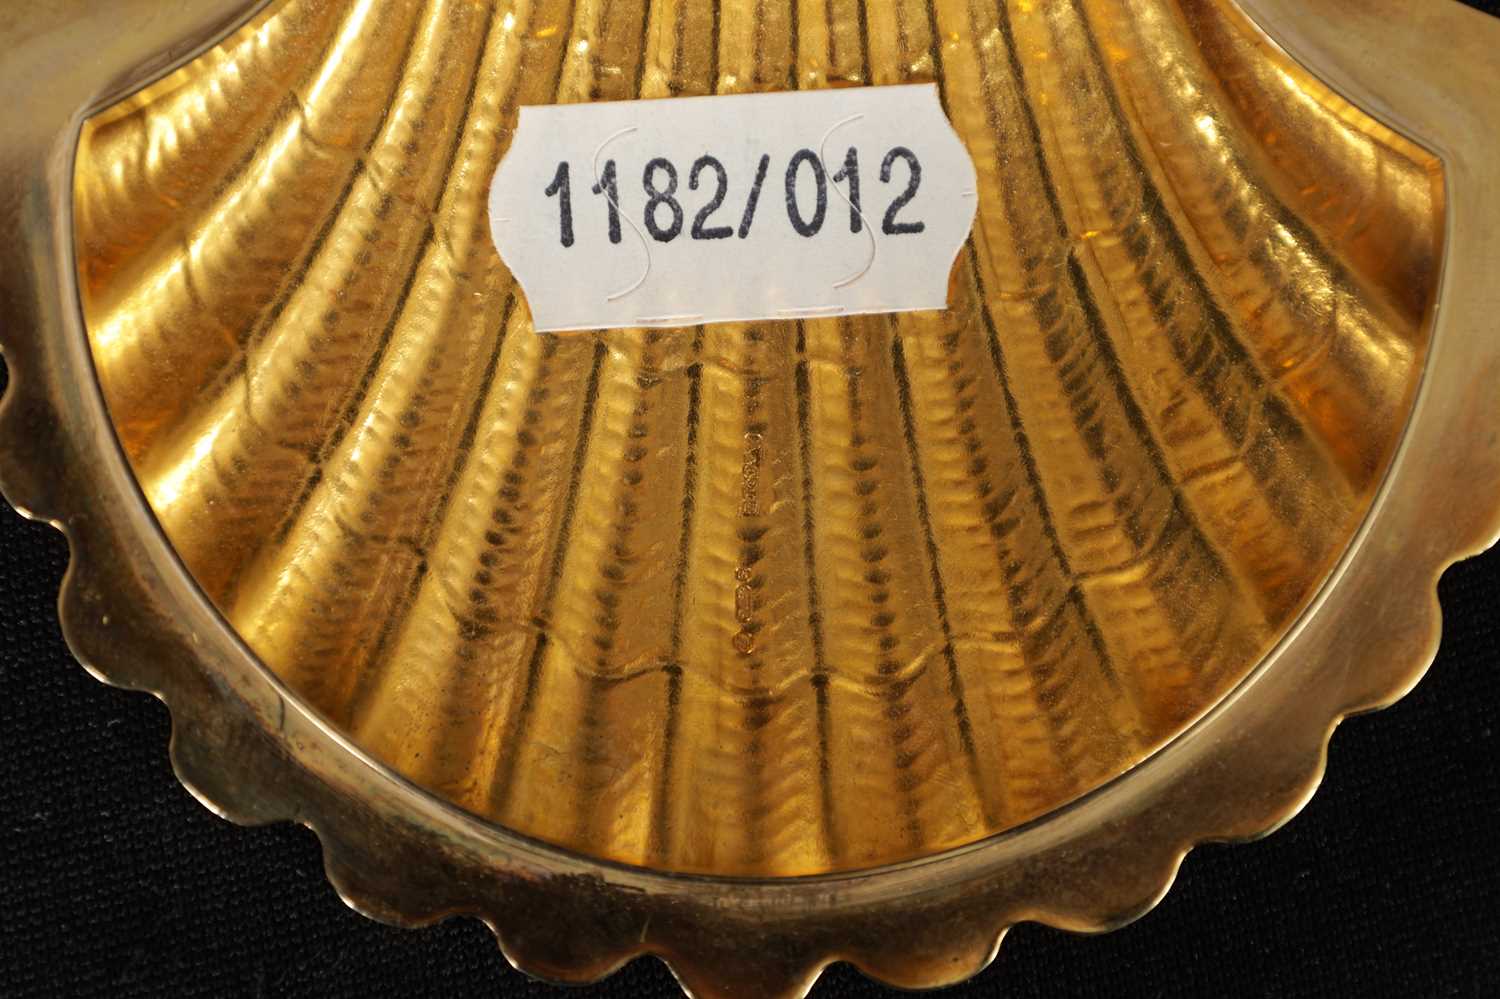 A 9CT .375 HALLMARKED GOLD POWDER COMPACT BY ASPREY - Image 8 of 8